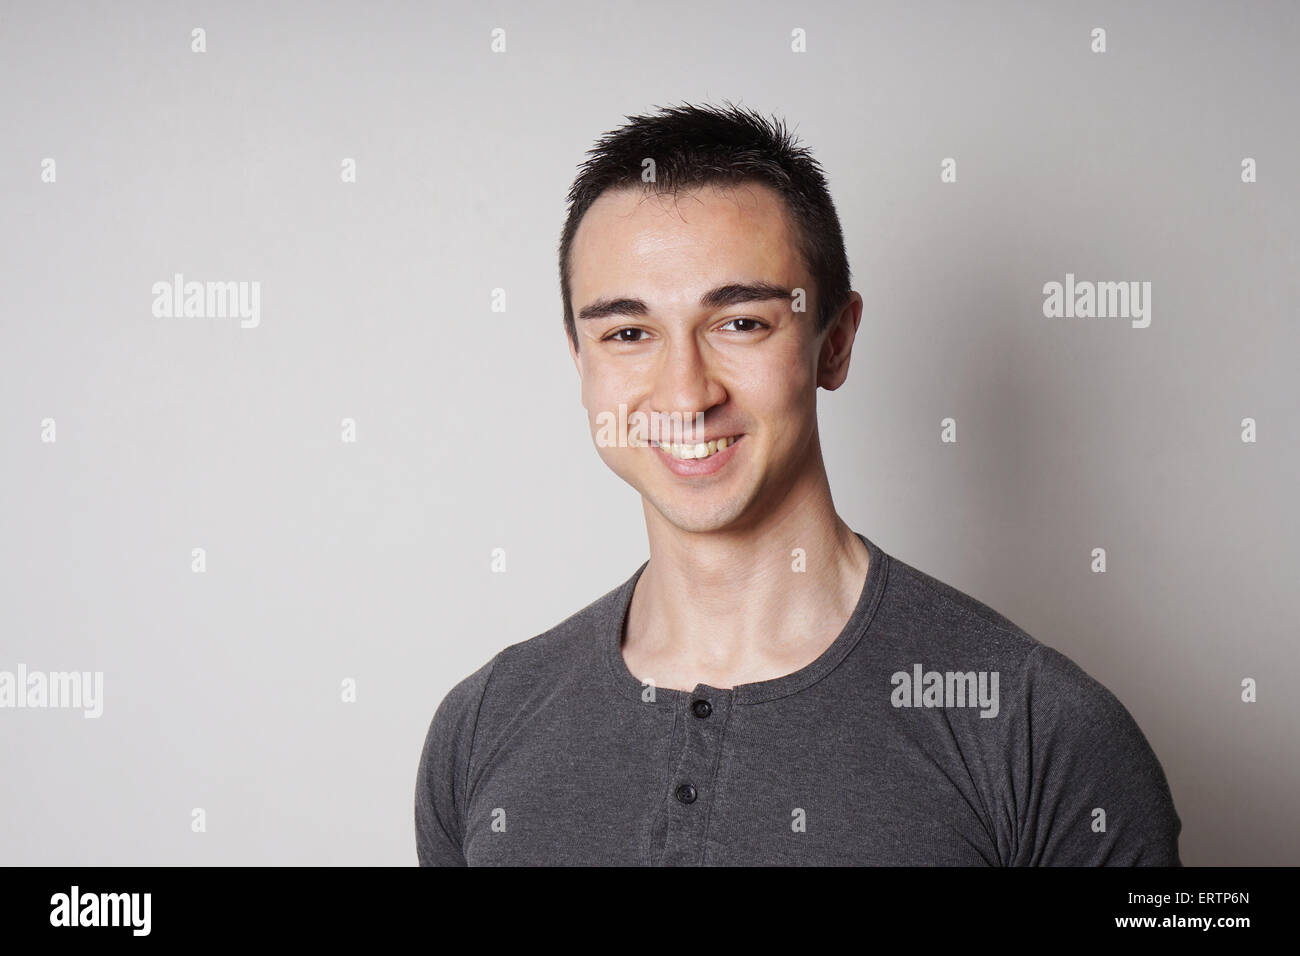 smiling young man Stock Photo